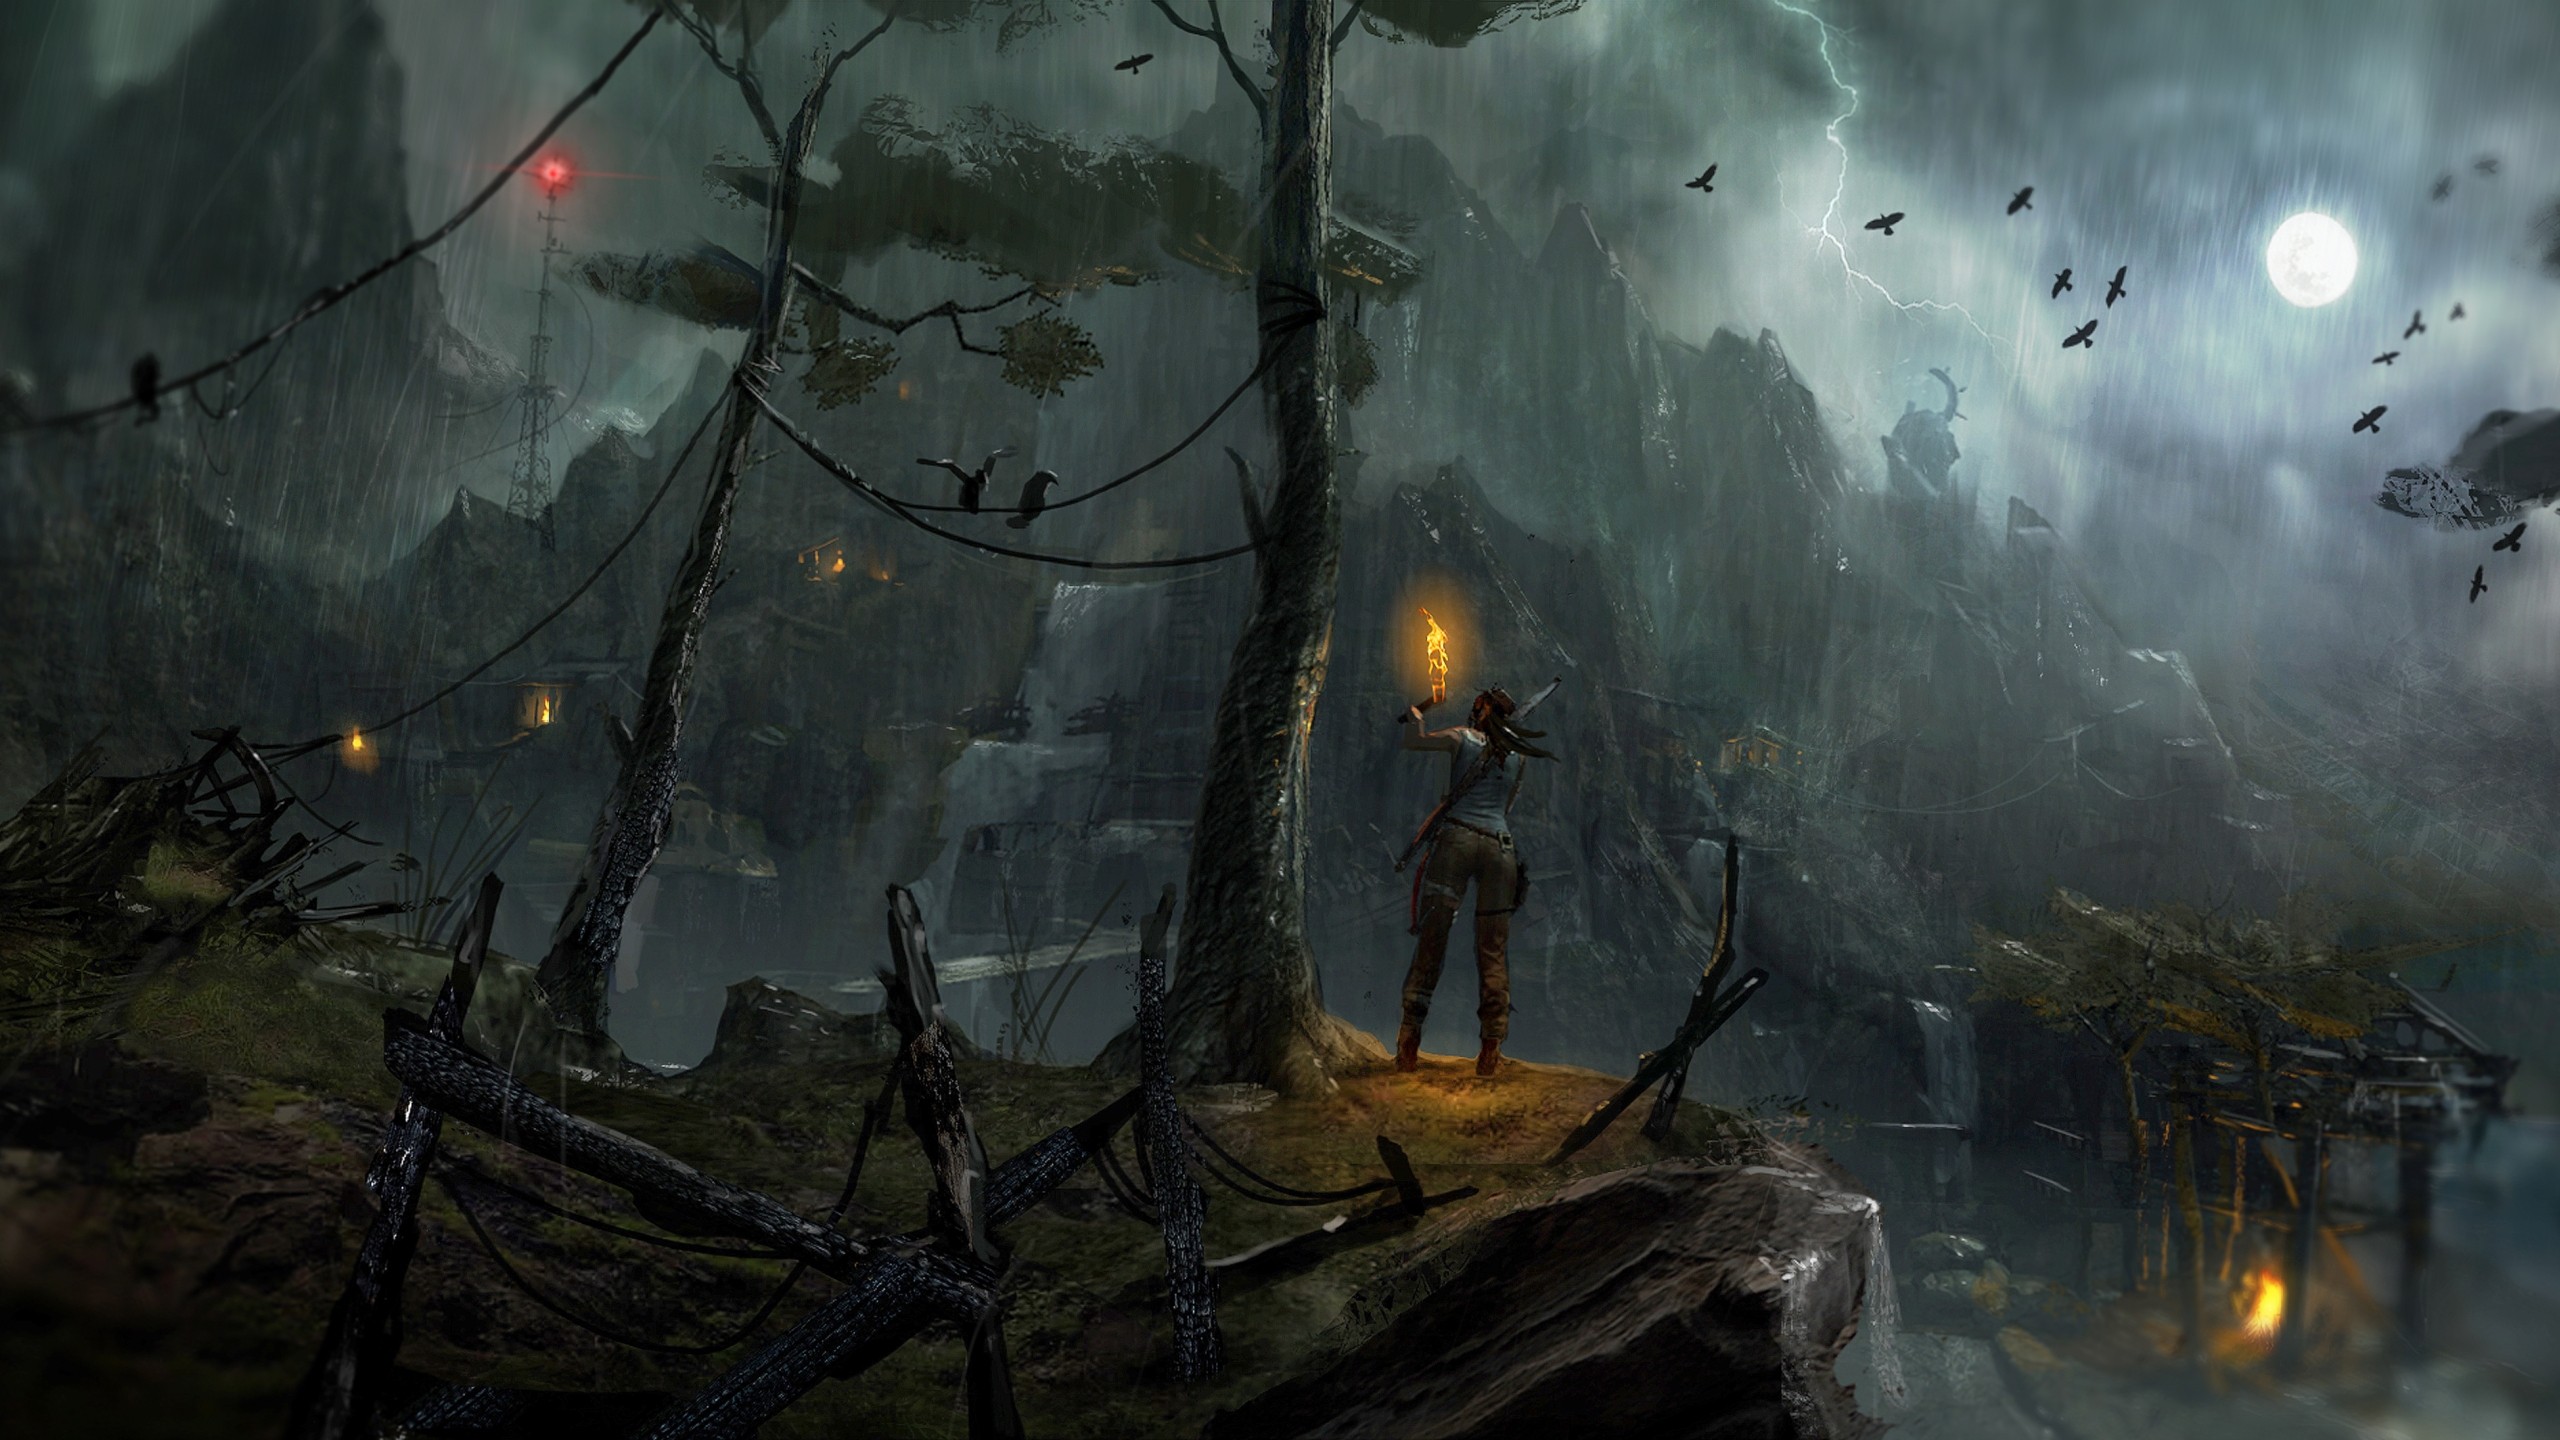 General 2560x1440 video games Tomb Raider video game art PC gaming Lara Croft (Tomb Raider) video game landscape mountains rain torches lightning birds storm trees